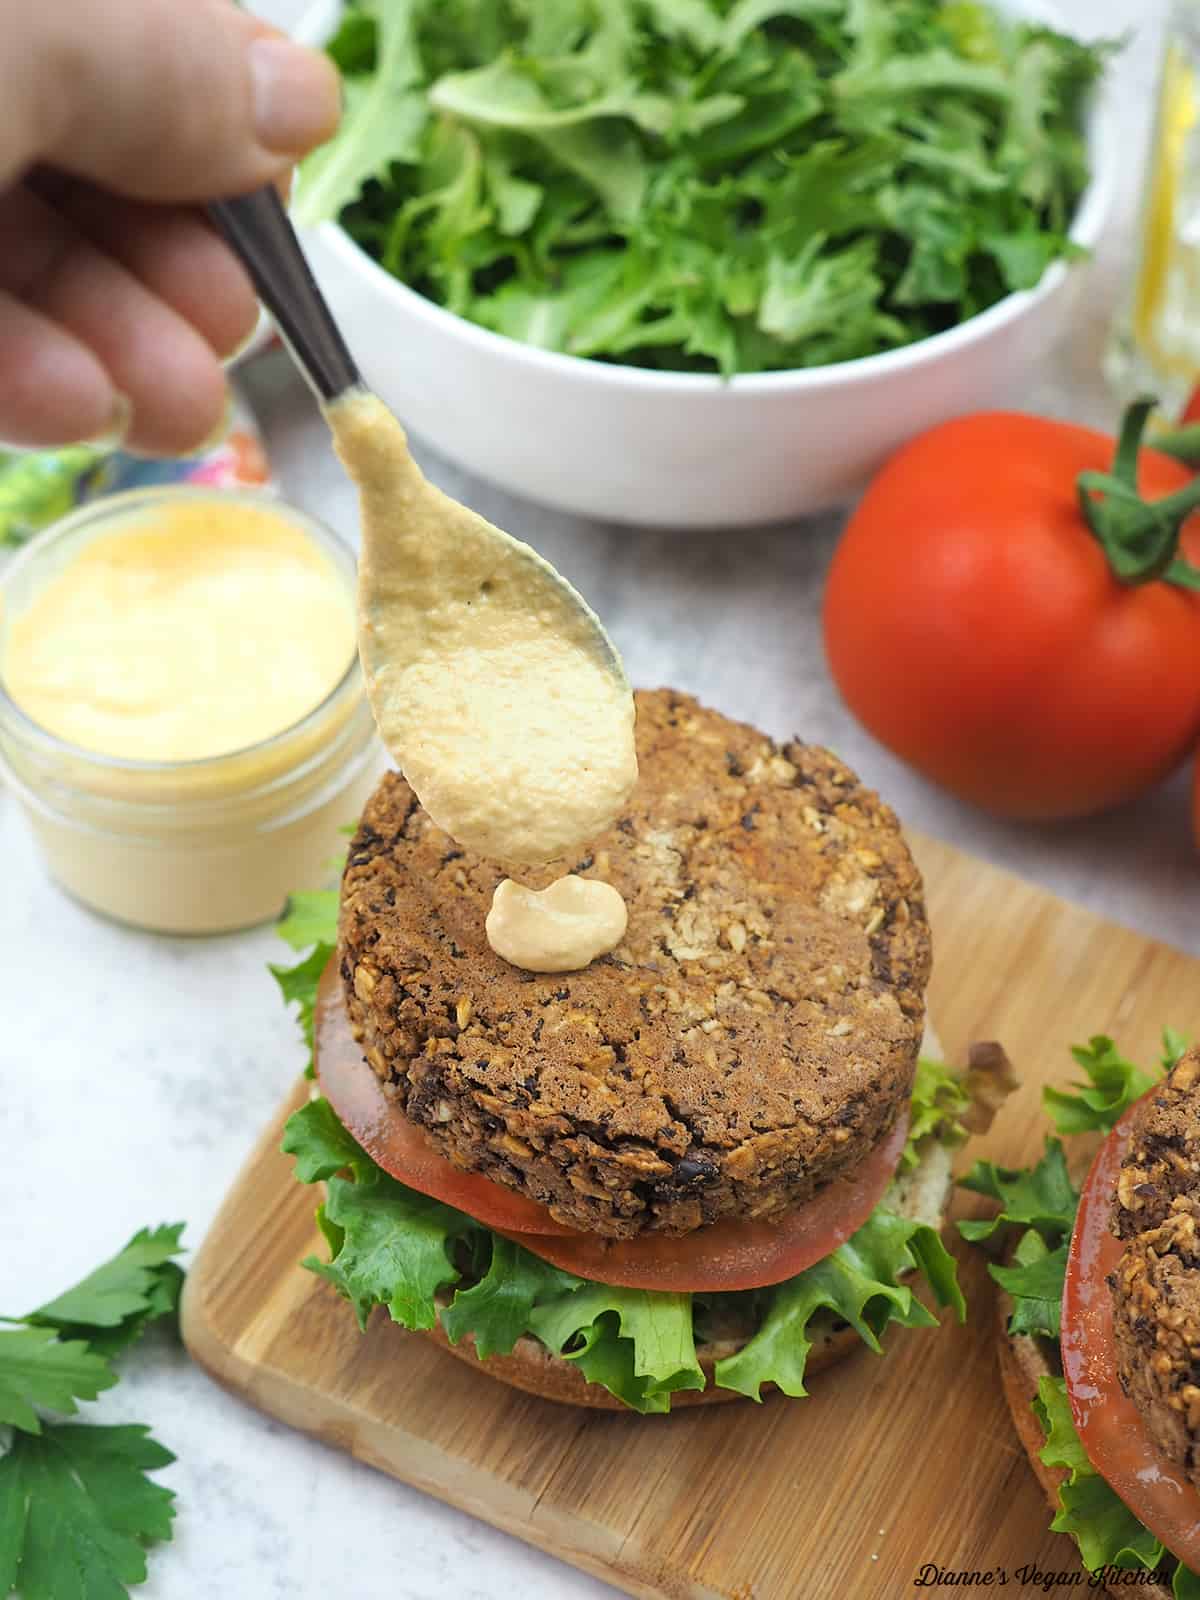 dripping cashew cheese onto a burger